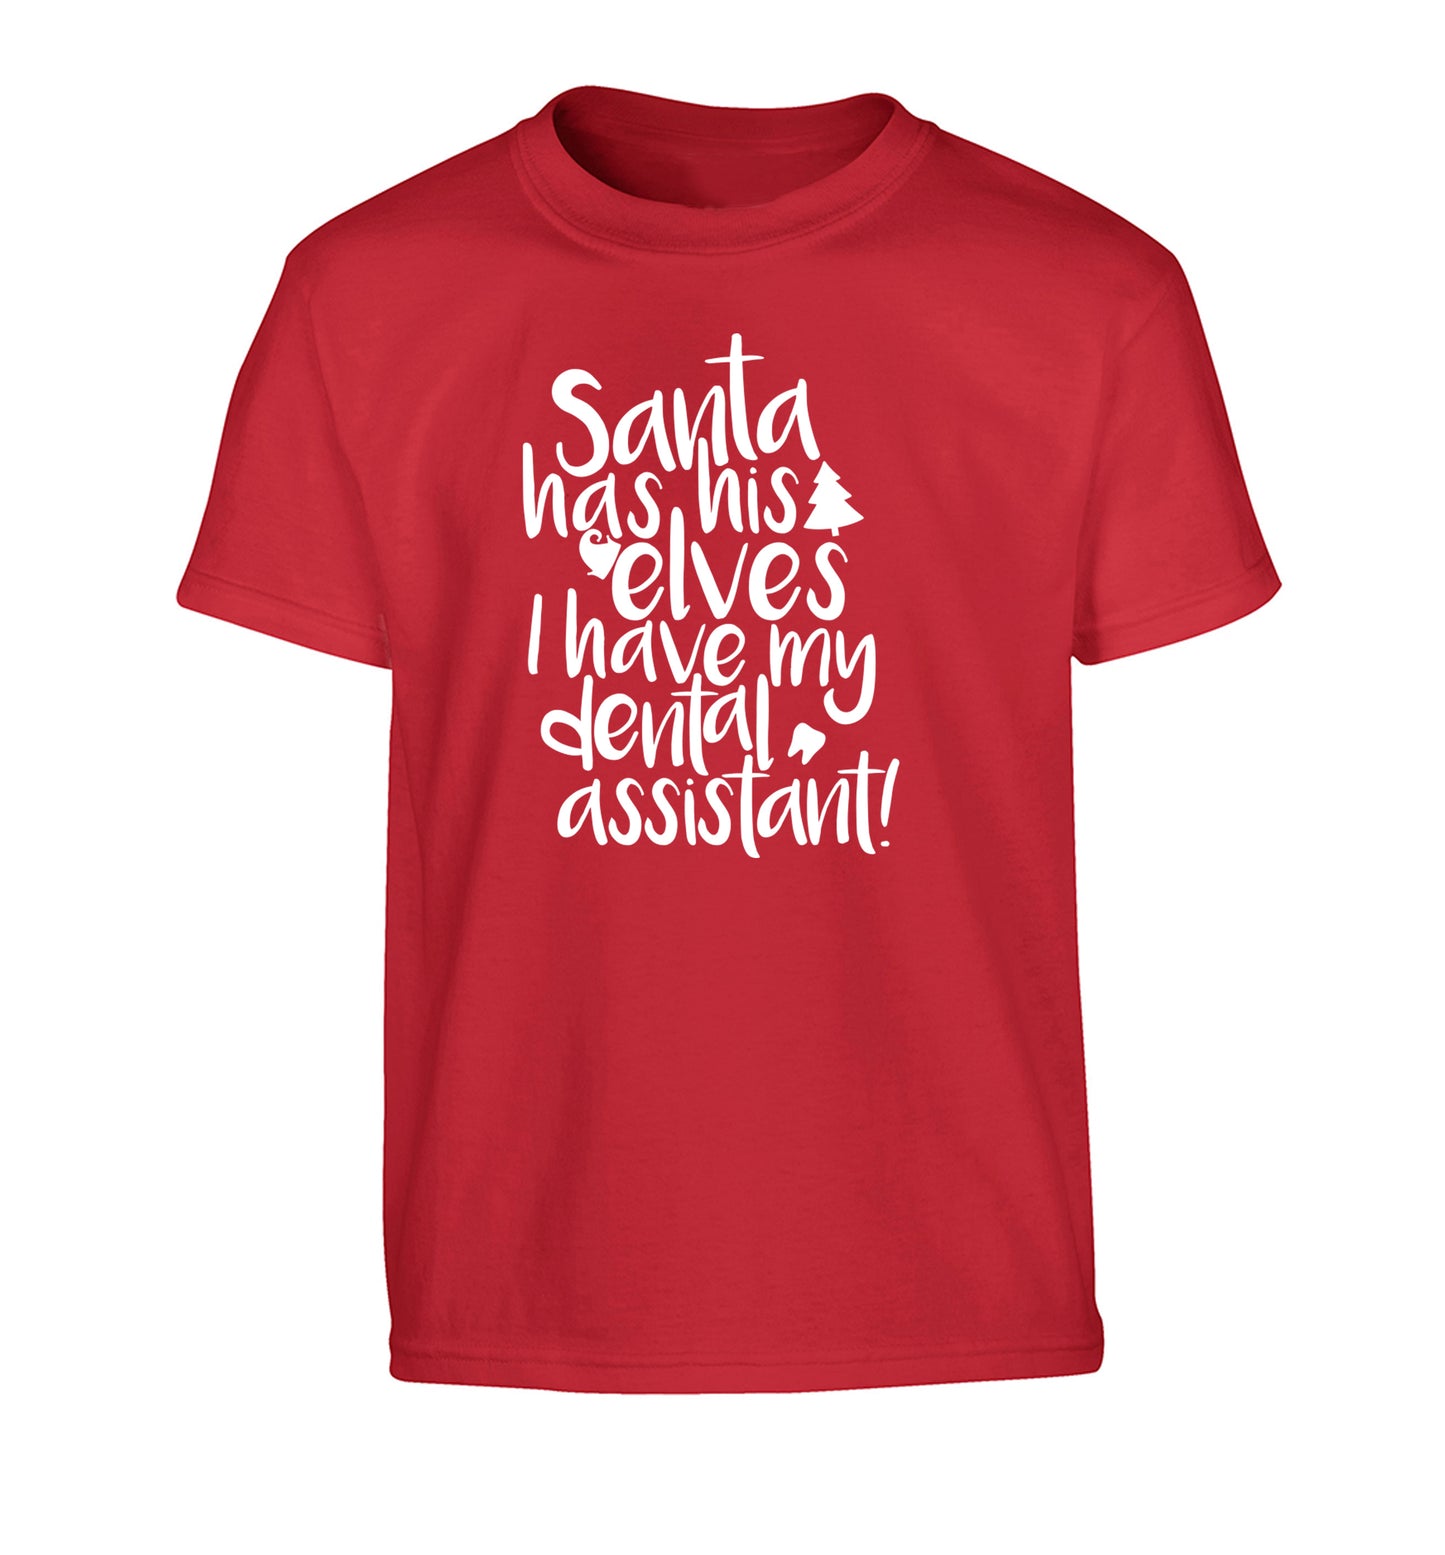 Santa has his elves I have my dental assistant Children's red Tshirt 12-14 Years